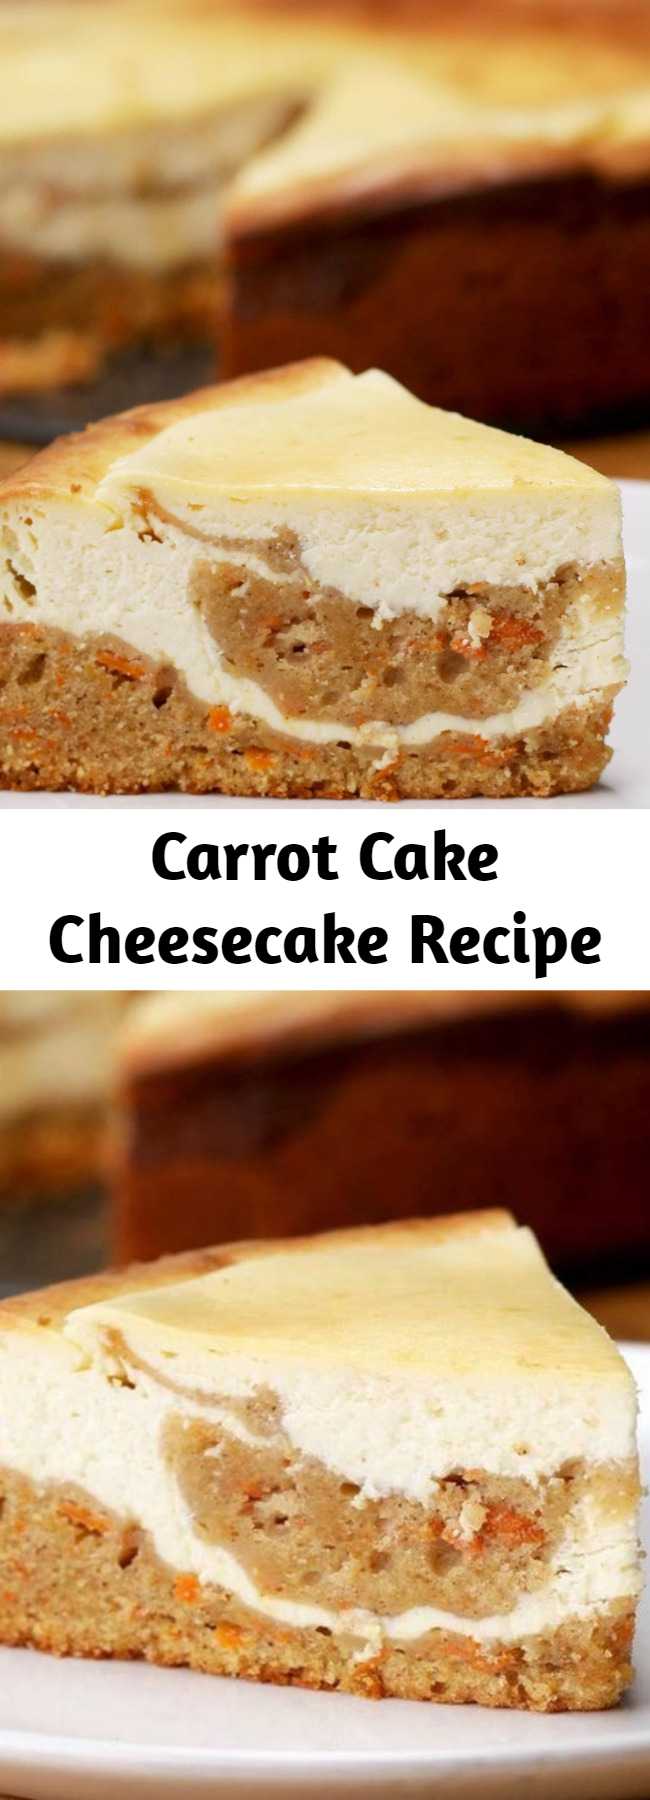 Carrot Cake Cheesecake Recipe - Two of my favorite cakes come together to make the ultimate spring dessert, this decadent carrot cake cheesecake. If you like carrot cake or cheesecake, you have to try this one! It’s an elegant dessert that is certain to impress. It would be perfect to make for Easter or an upcoming birthday. Really, who wouldn’t love this?